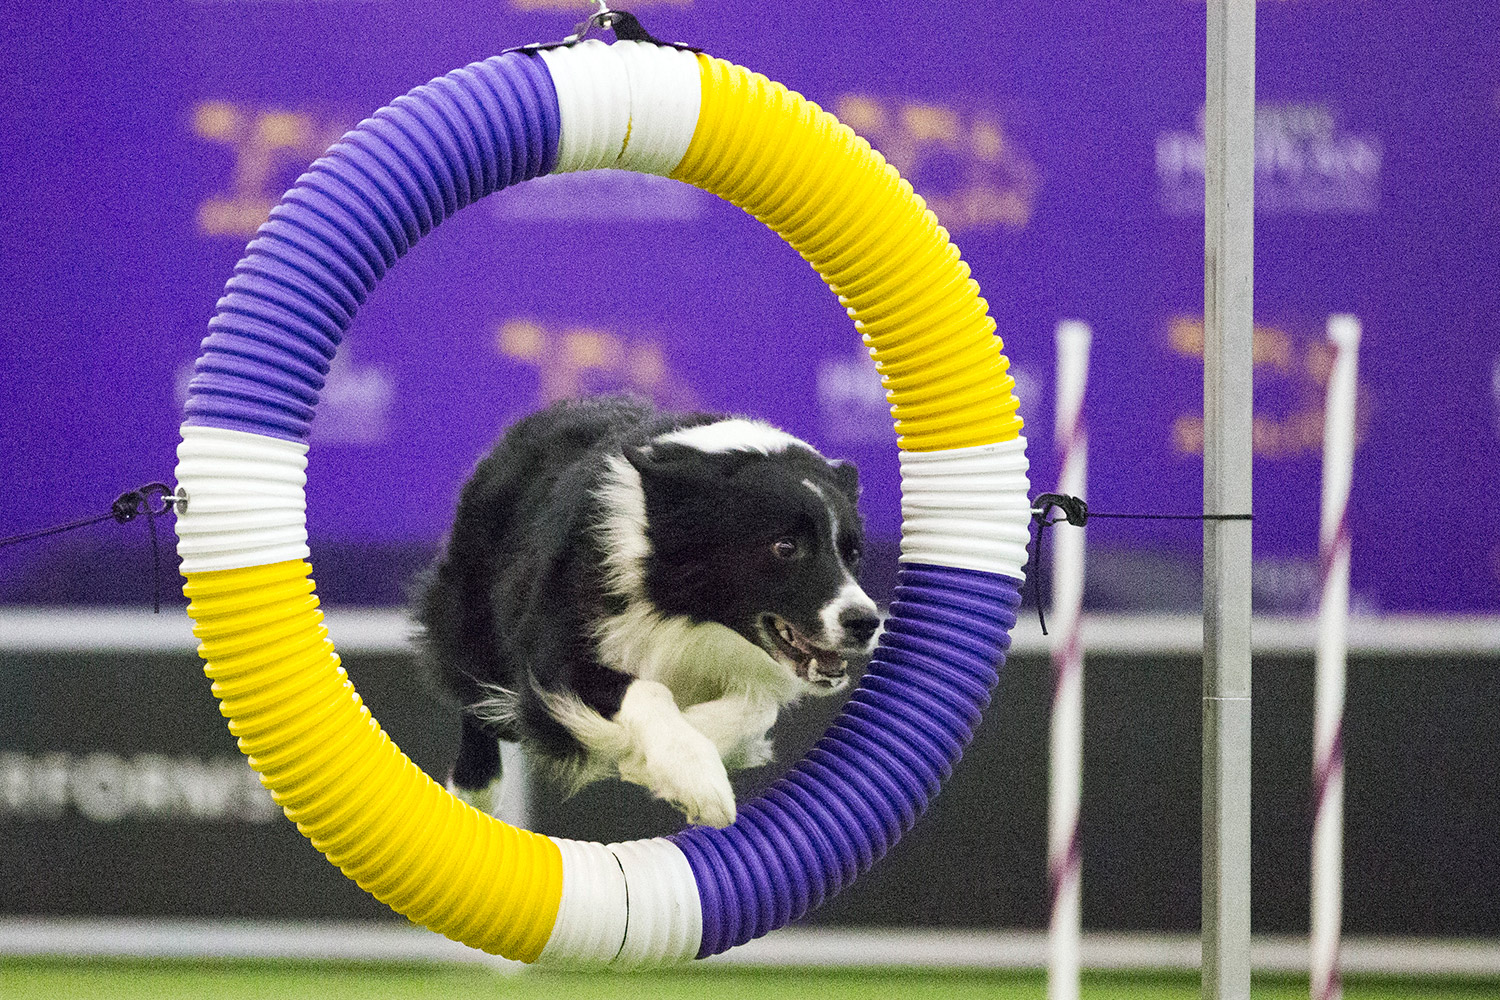 At Westminster dog show, agility puts border collies front and center